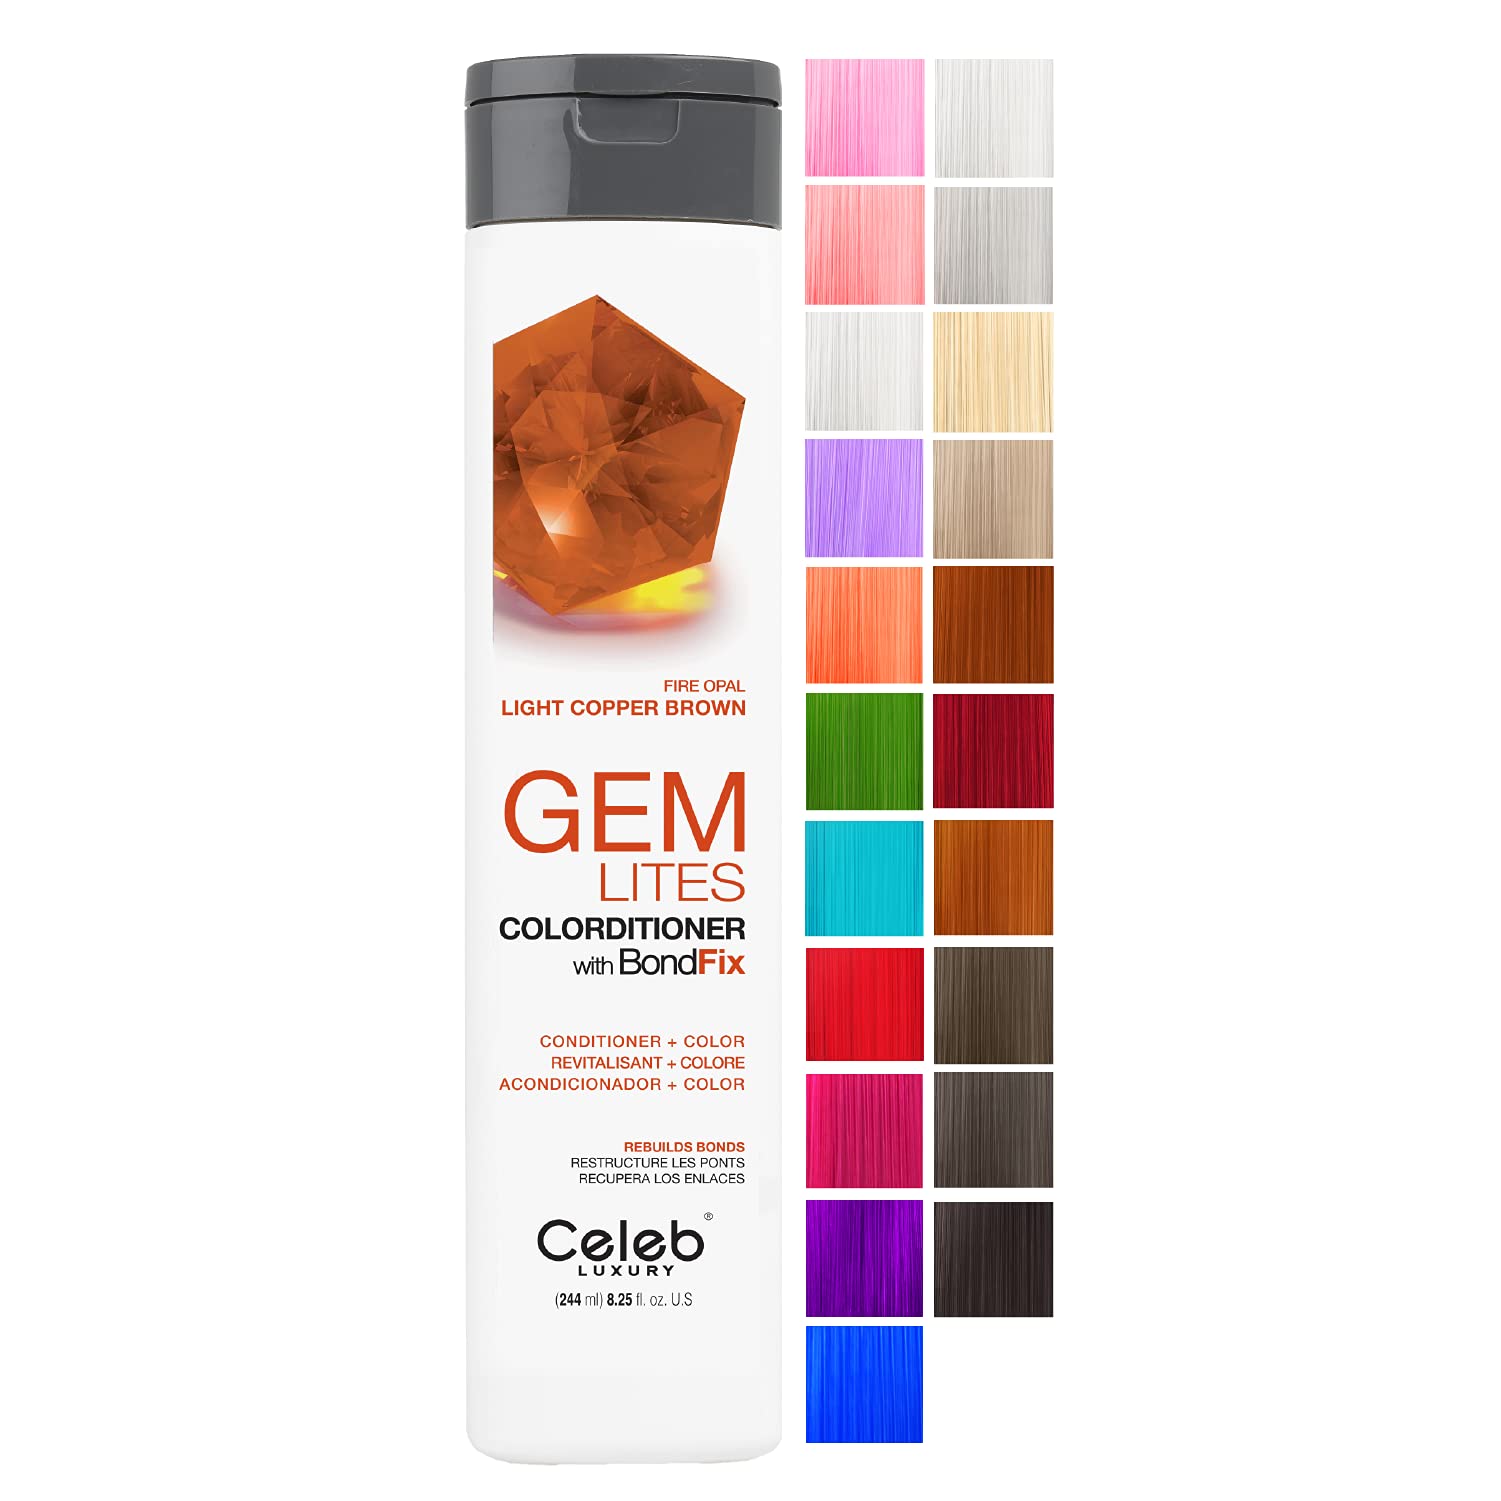 Celeb Luxury Gem Lites Colorditioner, Semi-Permanent Professional Hair Color Depositing Conditioner, Fire Opal